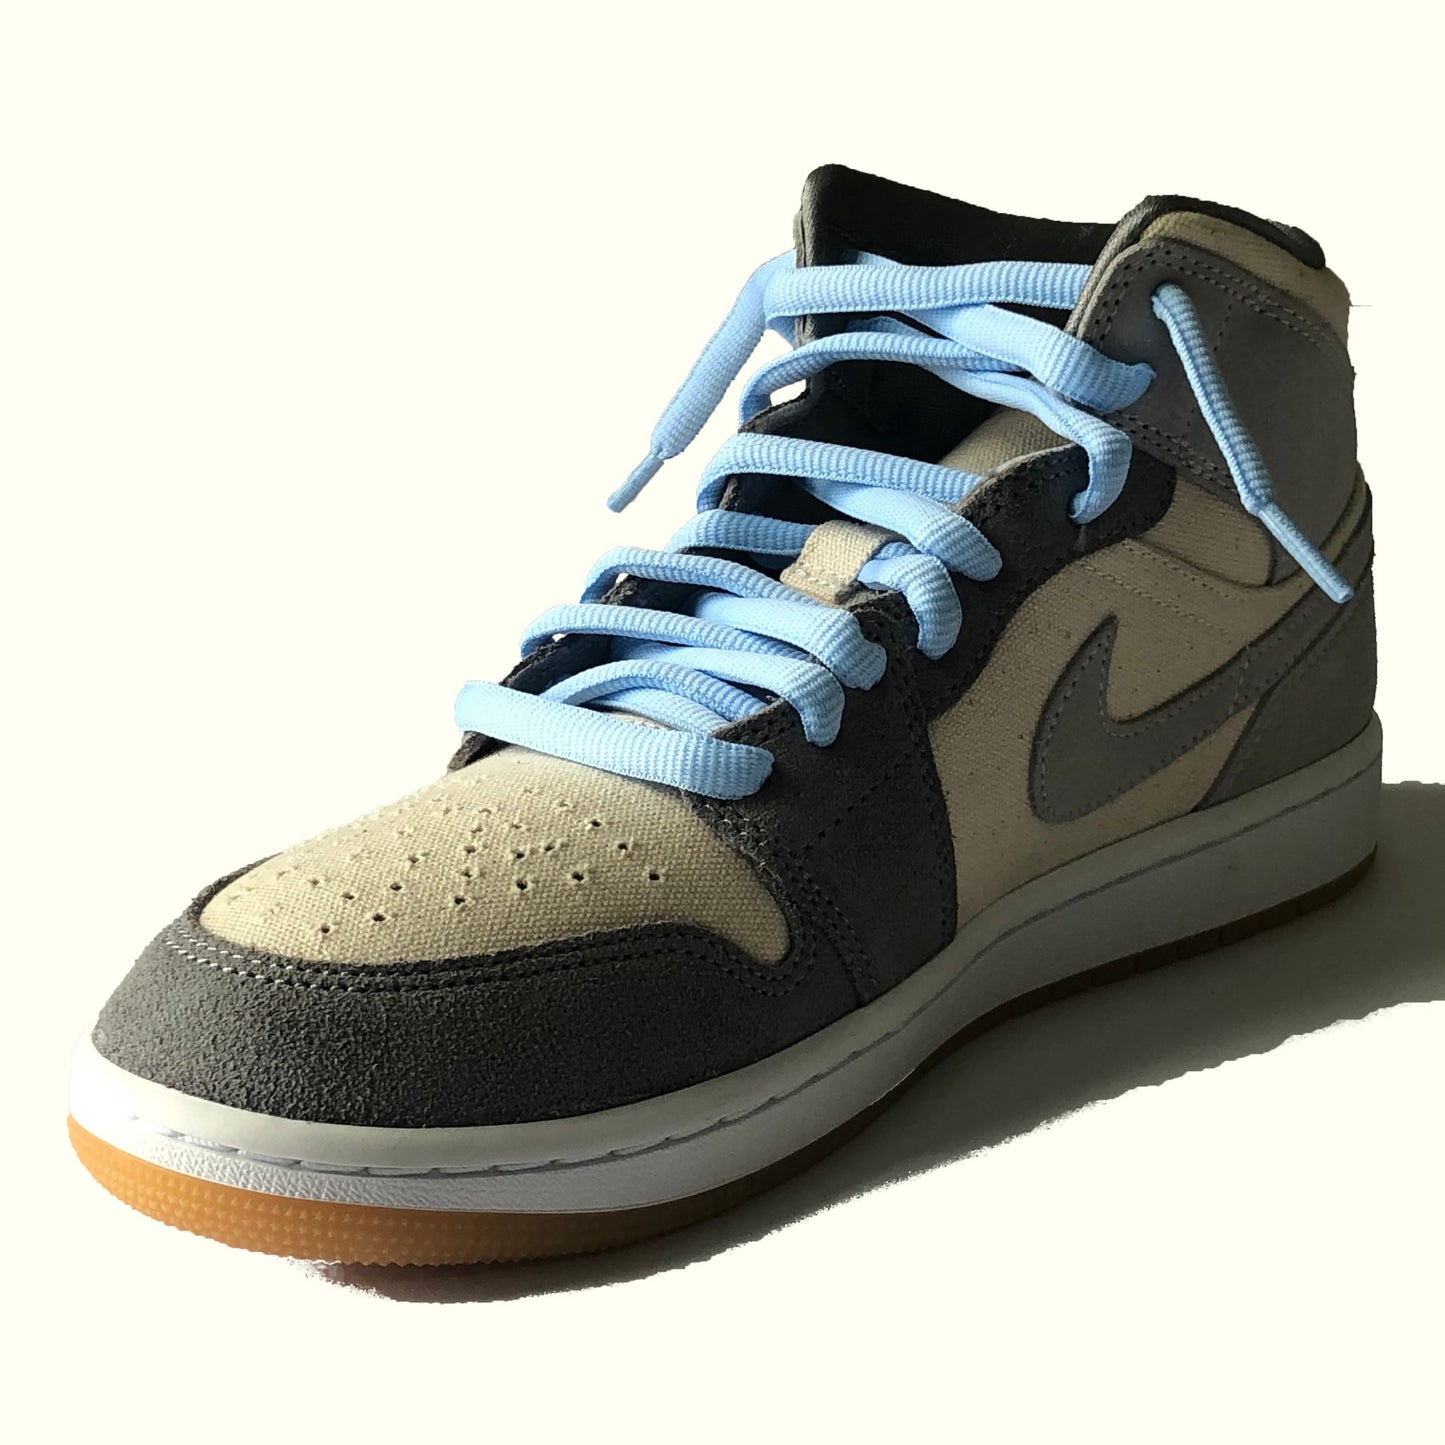 Sky Blue | SB Dunks Inspired Oval laces